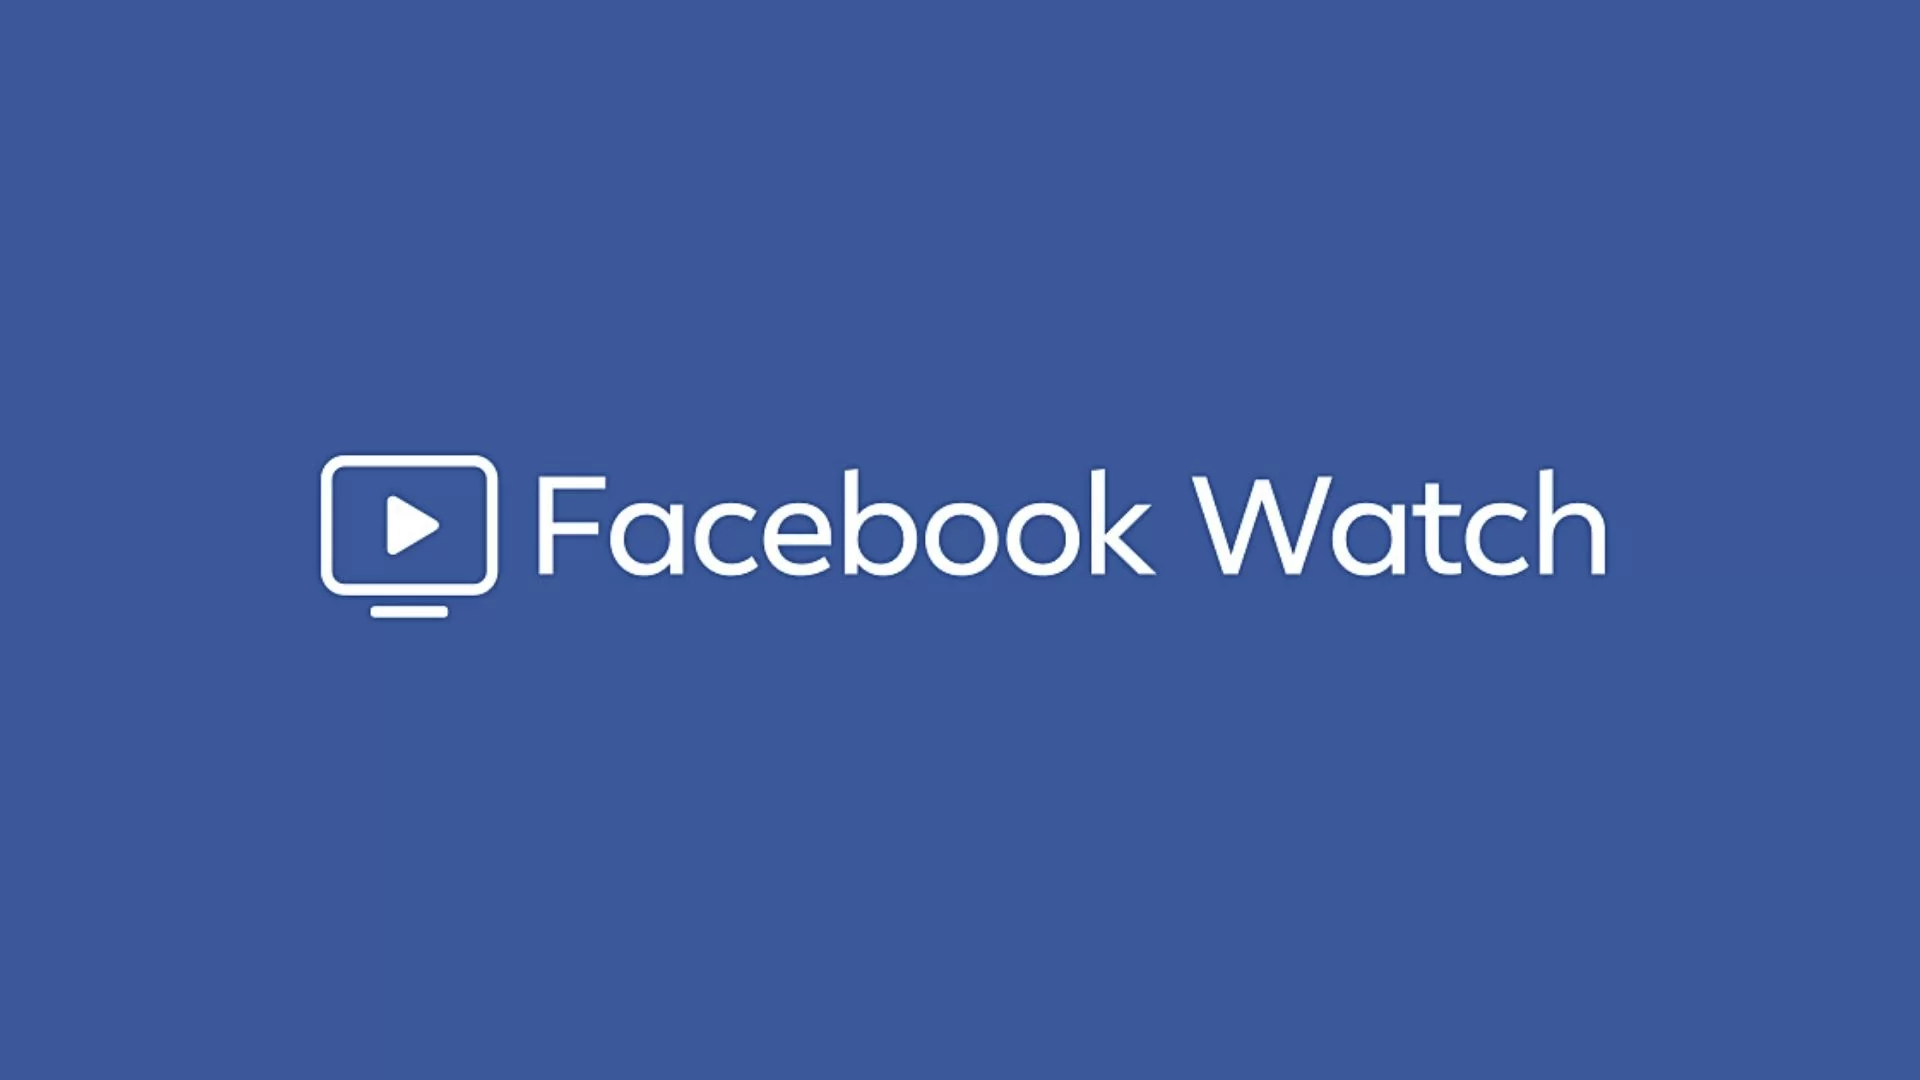 What Is Facebook Watch?